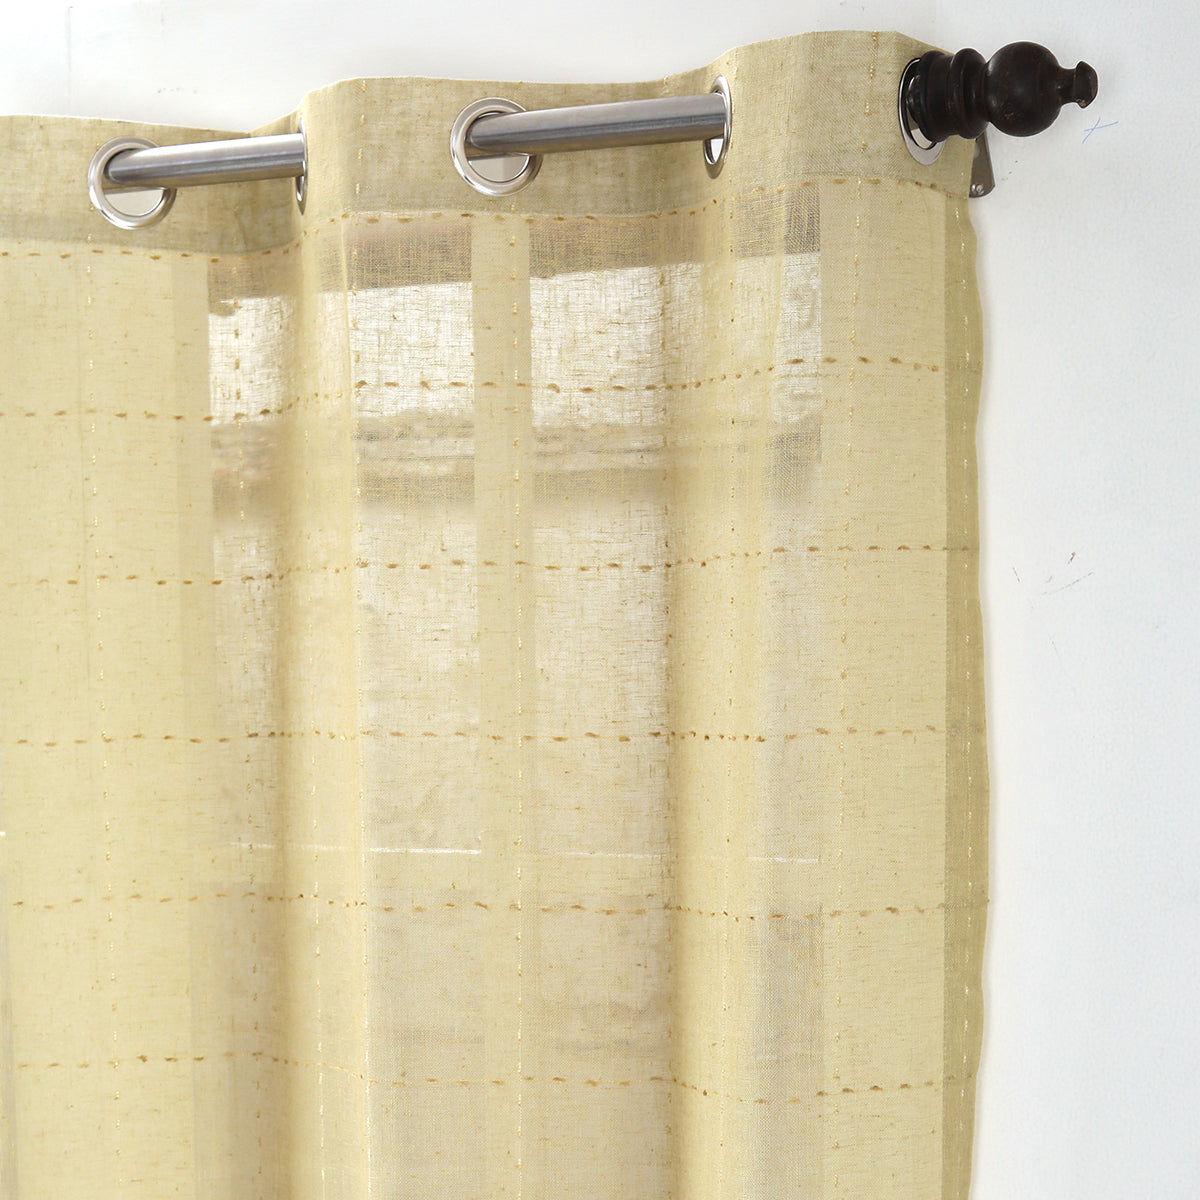 Solidonia Square Solid 2PC Gold Curtain Set